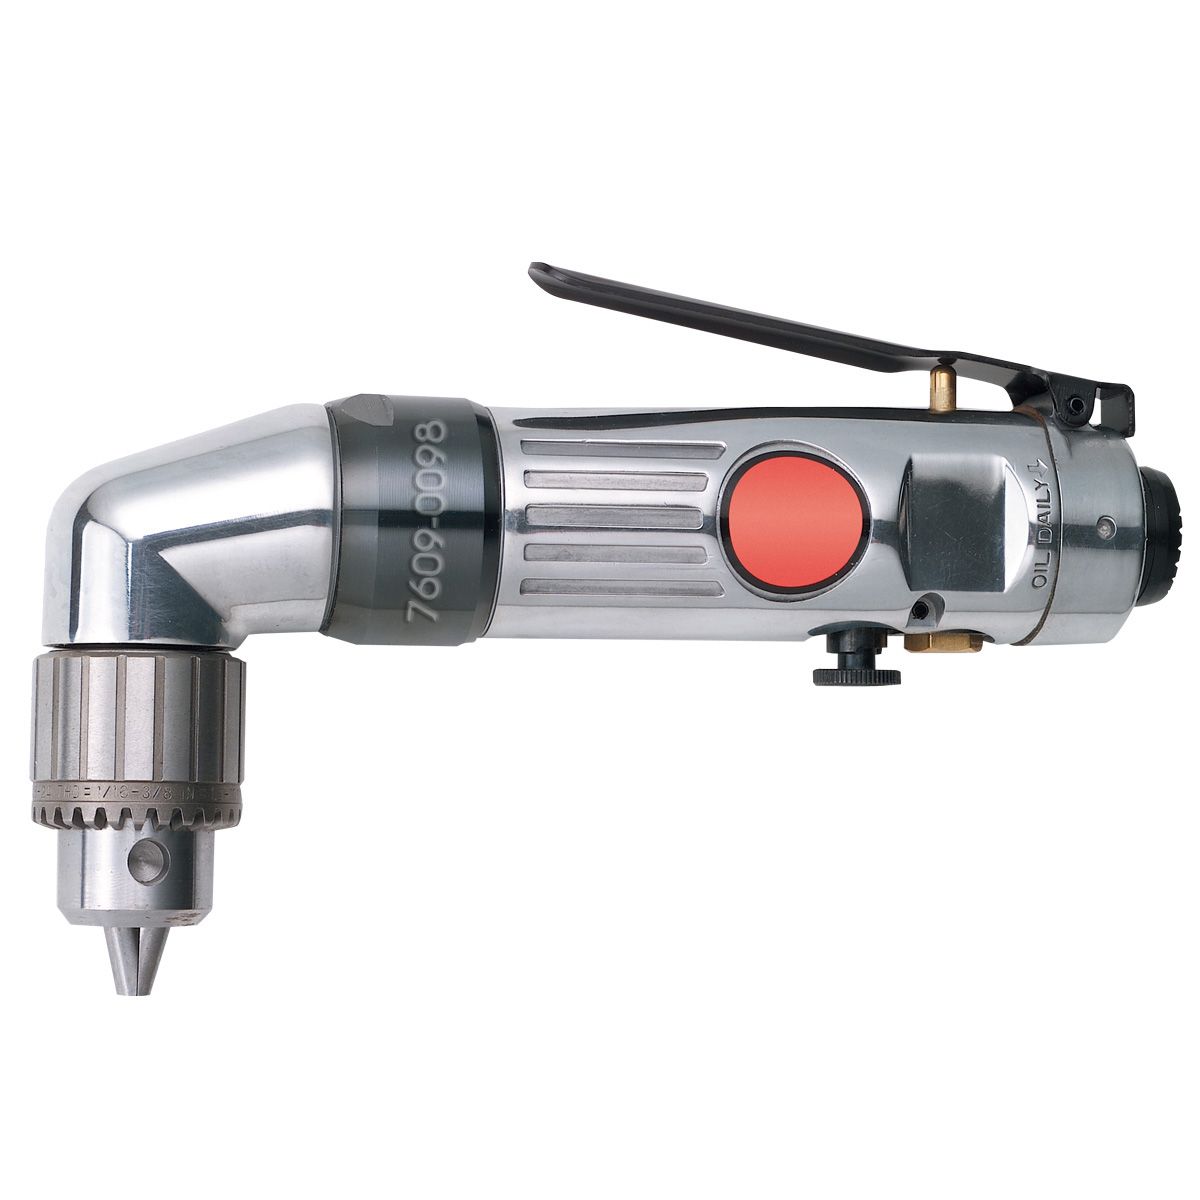 Z-LIMIT 3/8" REVERSIBLE ANGLE AIR DRILL - MADE IN TAIWAN (7609-0098)